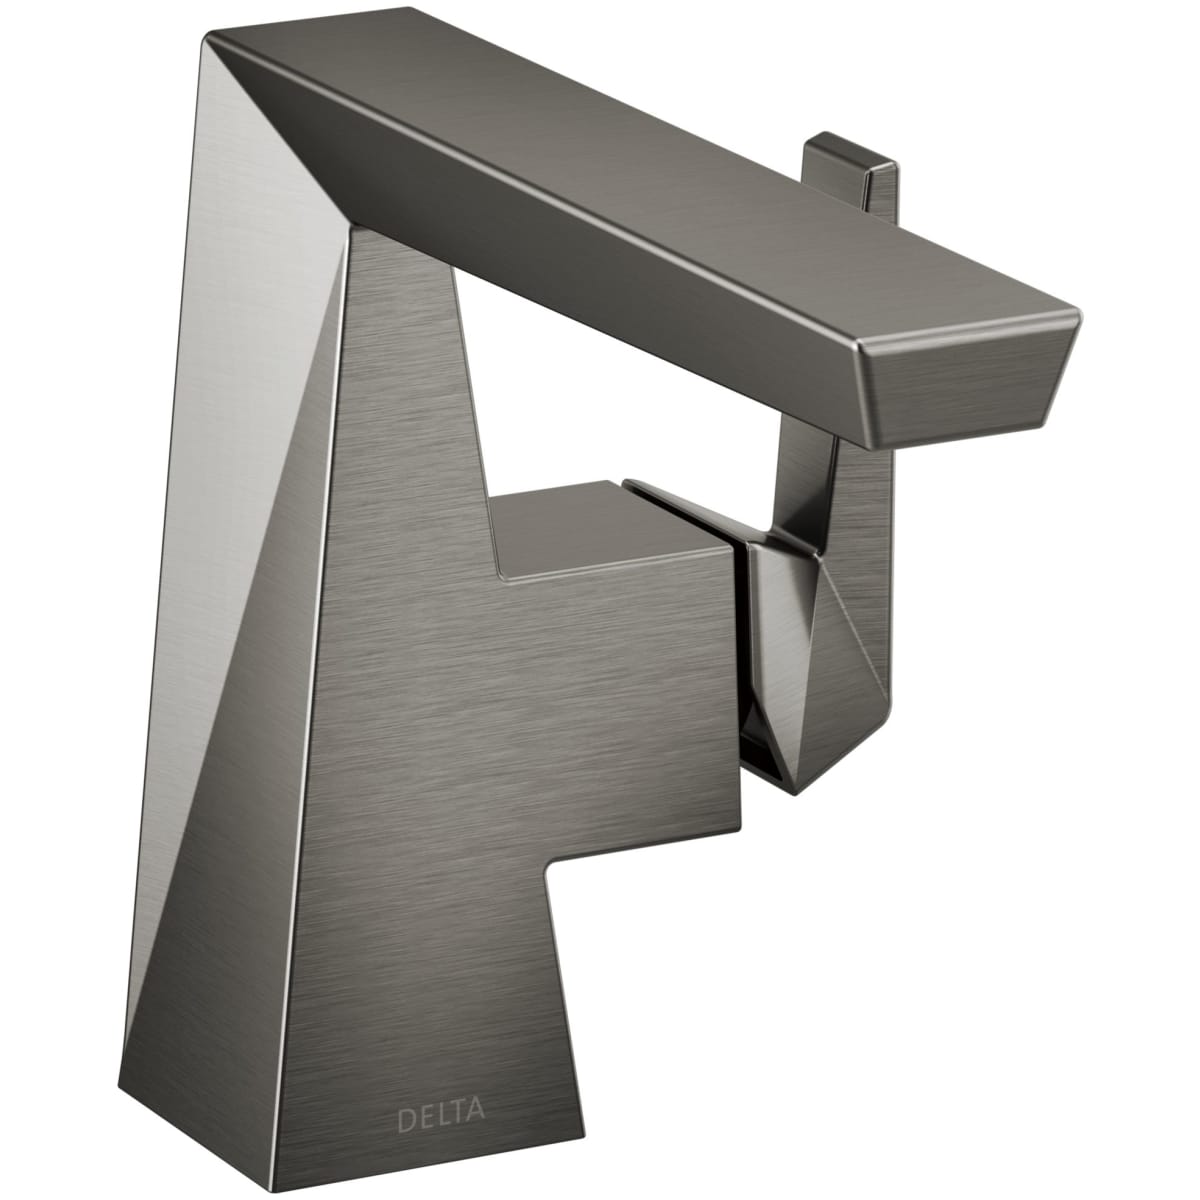 Trillian 1-Lever Hndl Lav Faucet in Black Stainless, No Drn